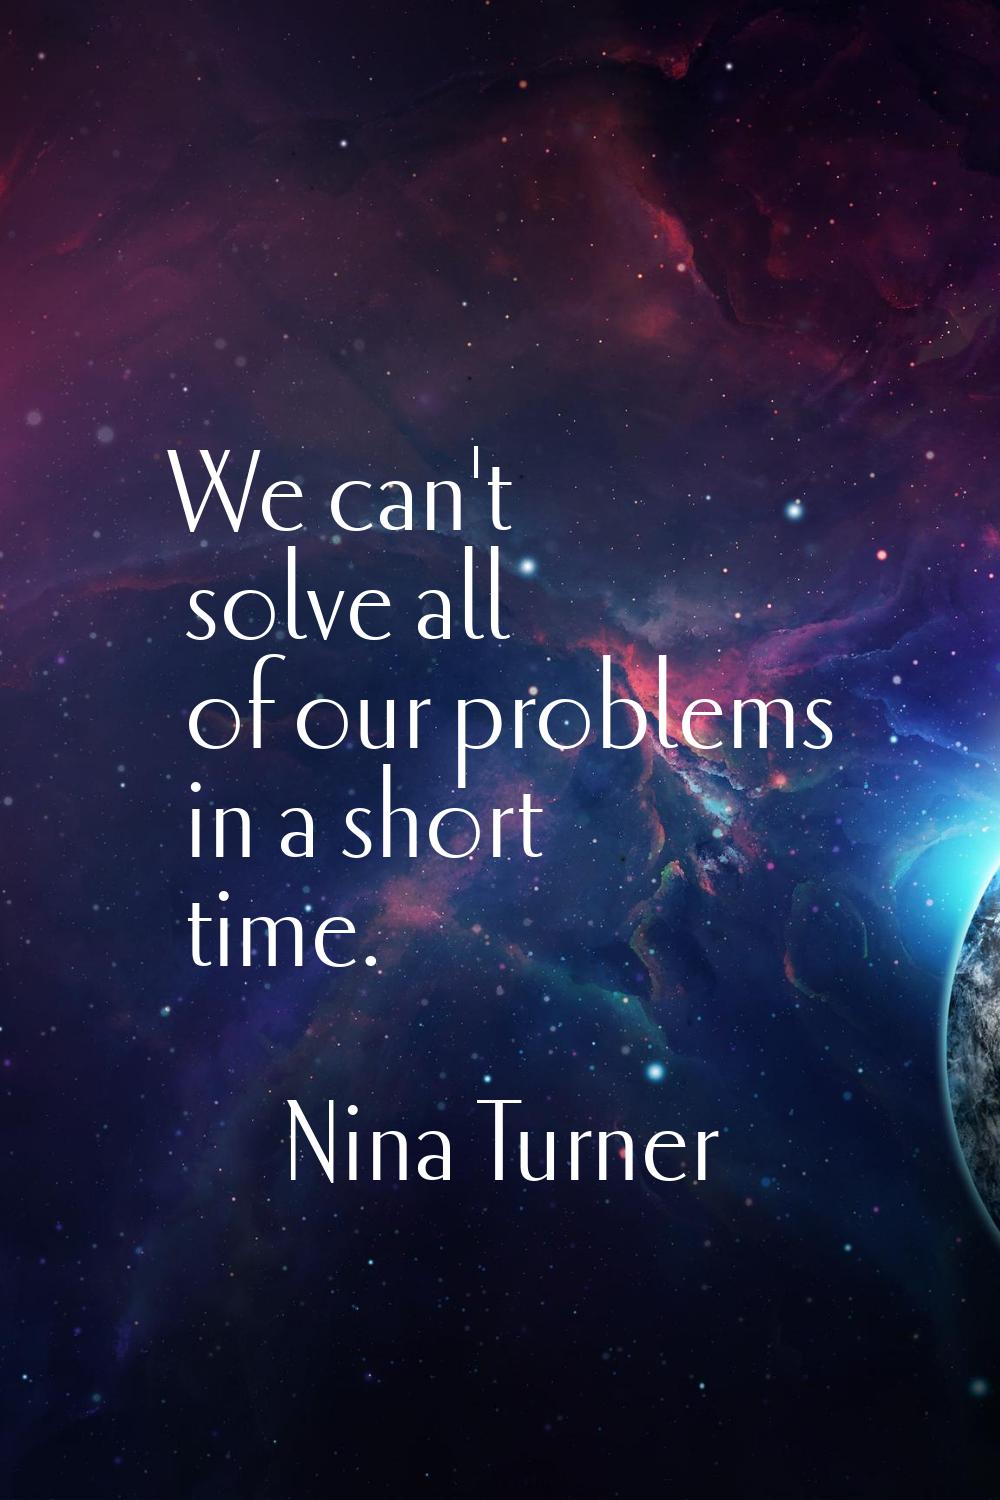 We can't solve all of our problems in a short time.